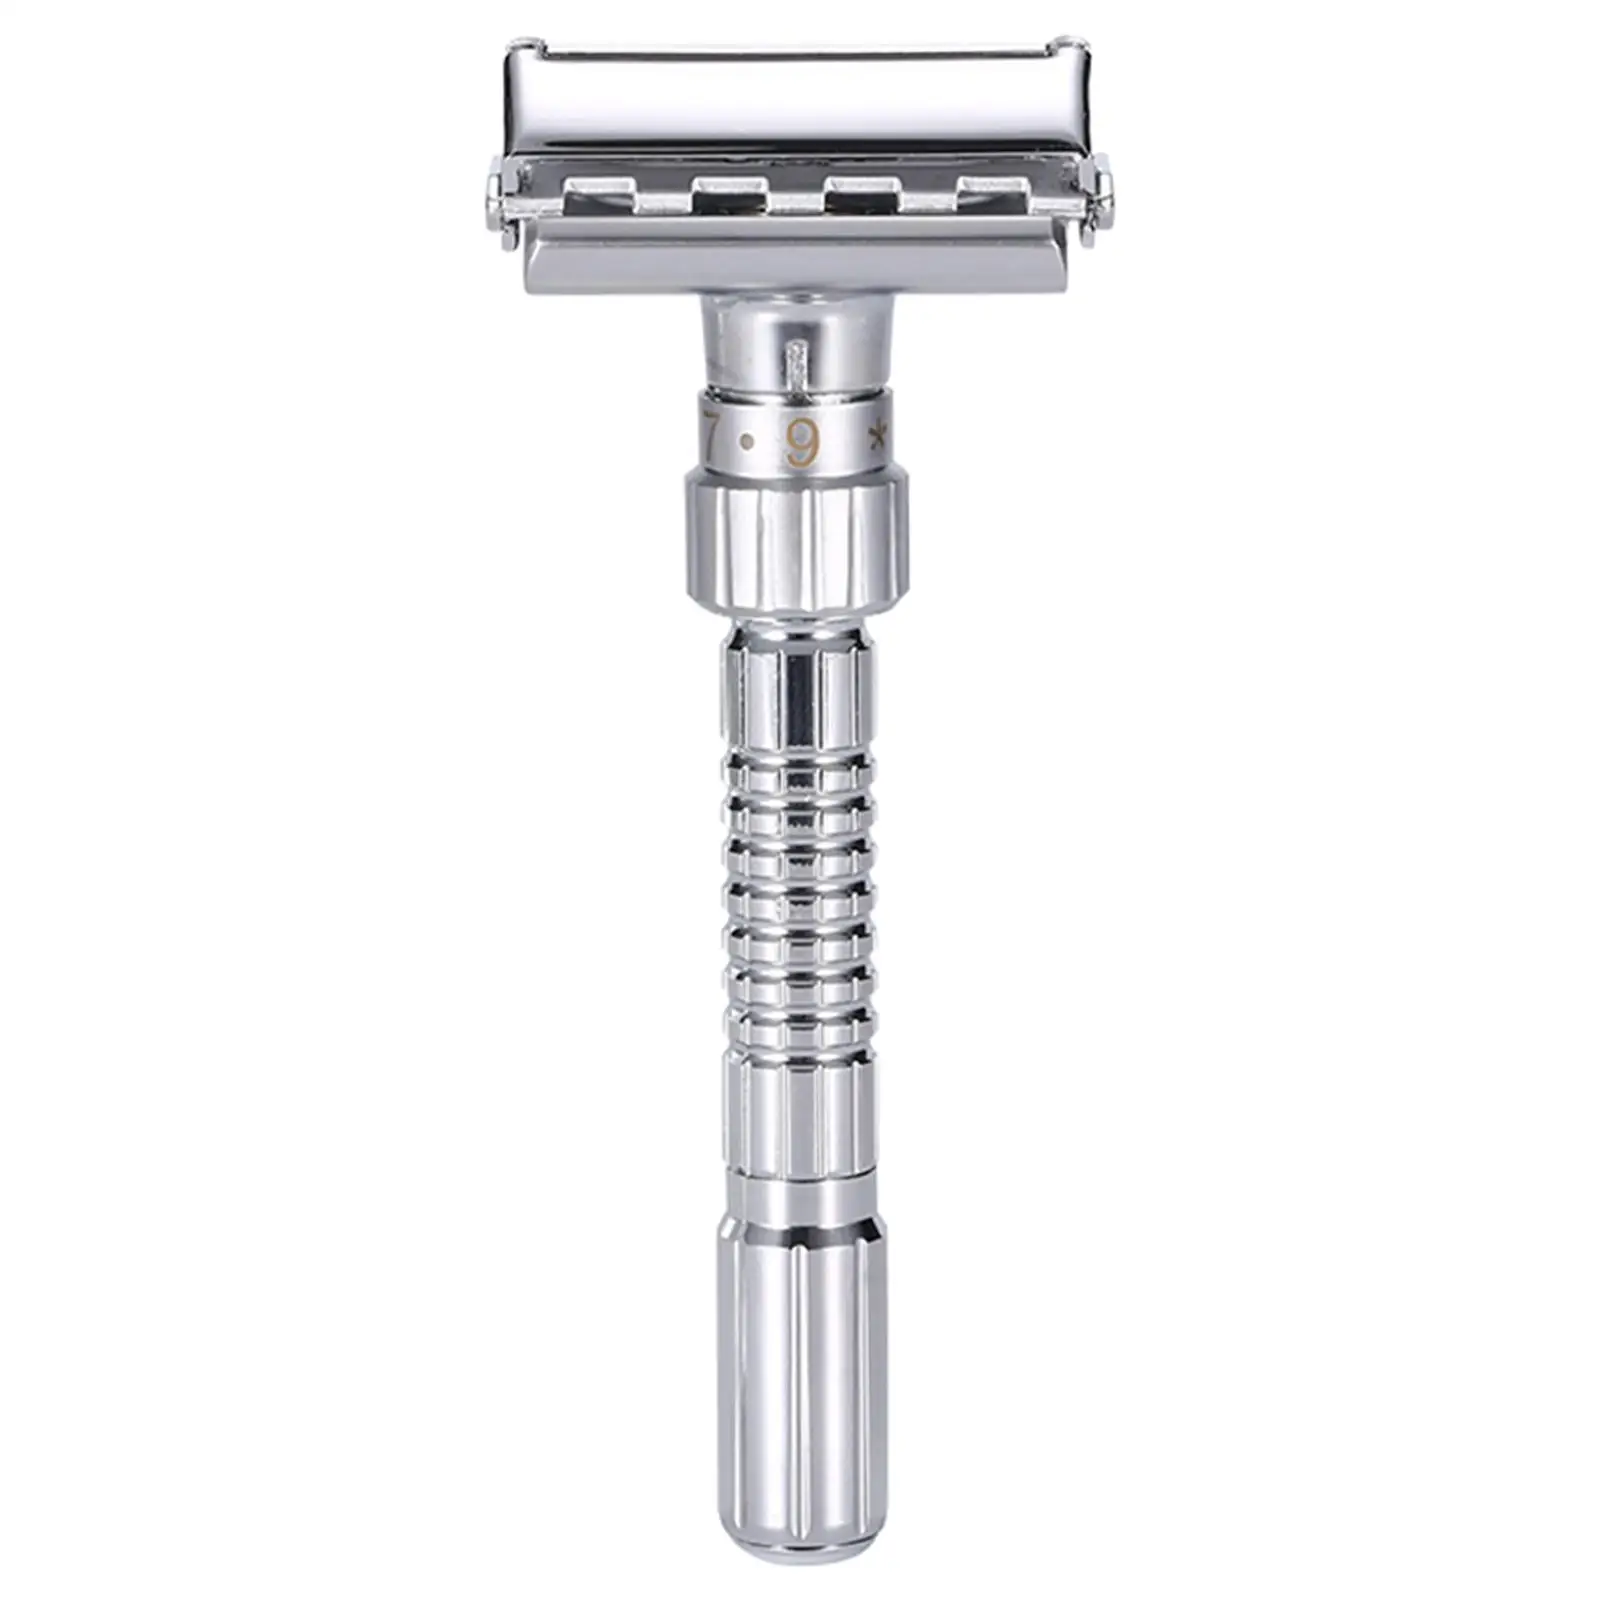 Manual Double Edge Safety Razor Plated with 5 Blades Reusable for Travel Men